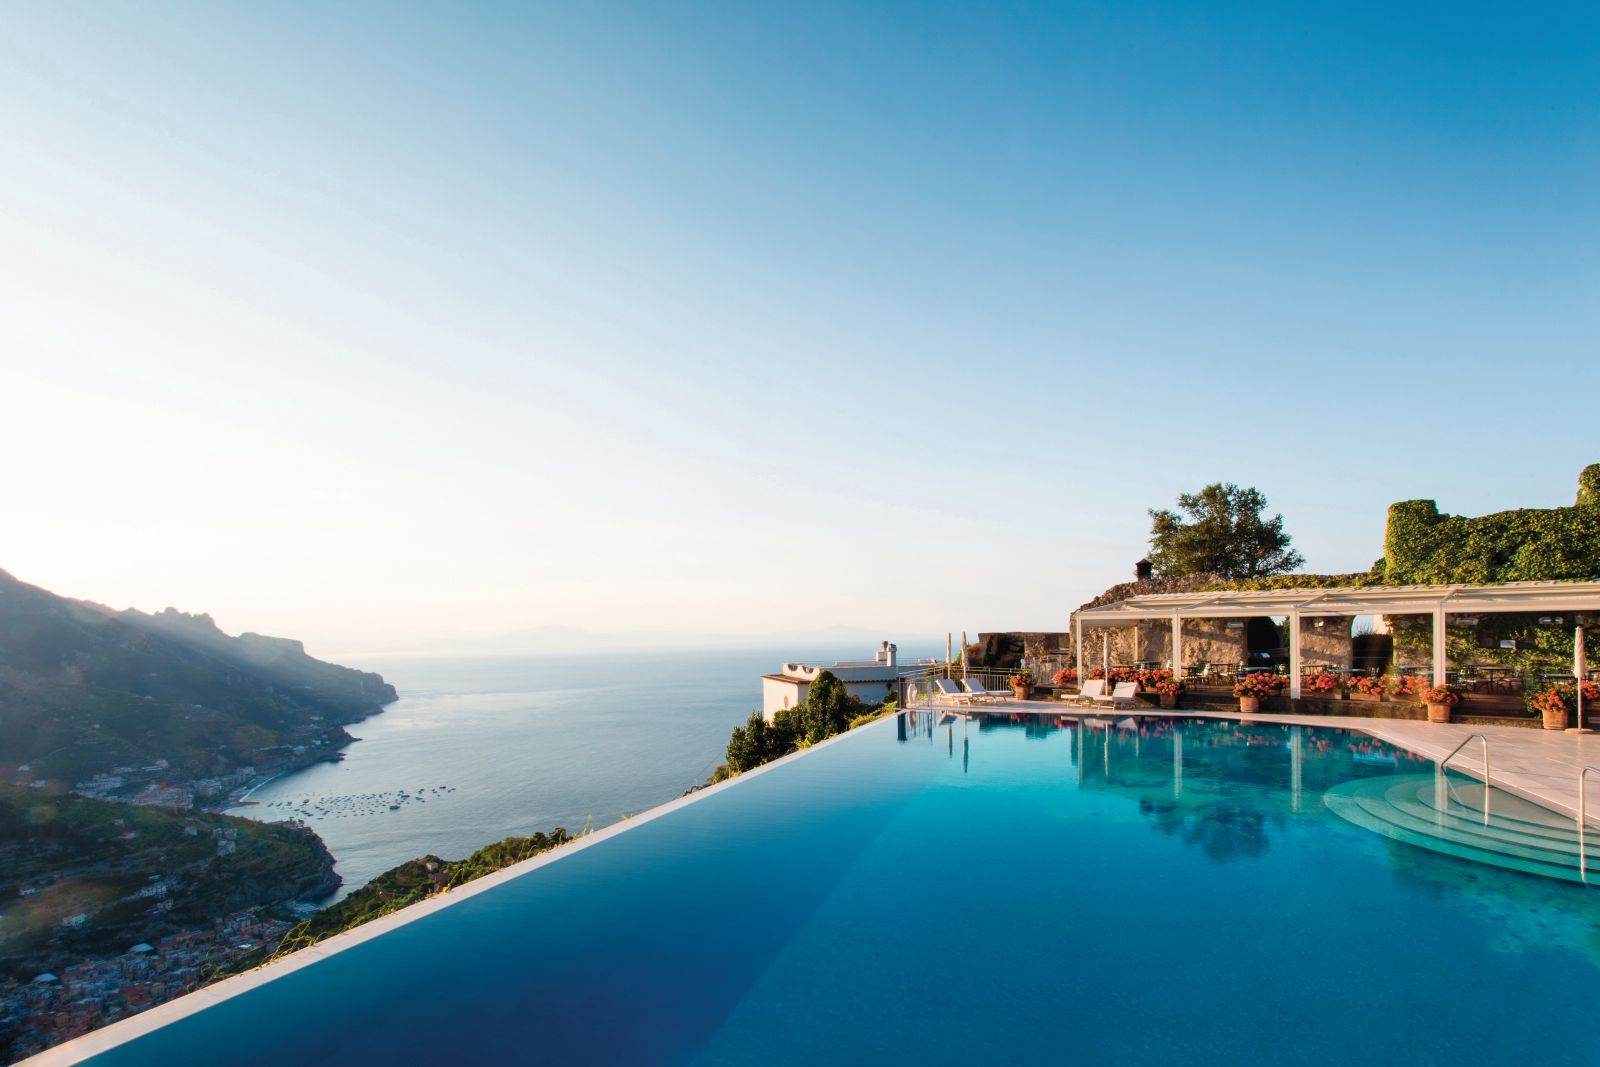 Infinity pool and Amalfi Coast views at Belmond Hotel Caruso in Ravello Italy